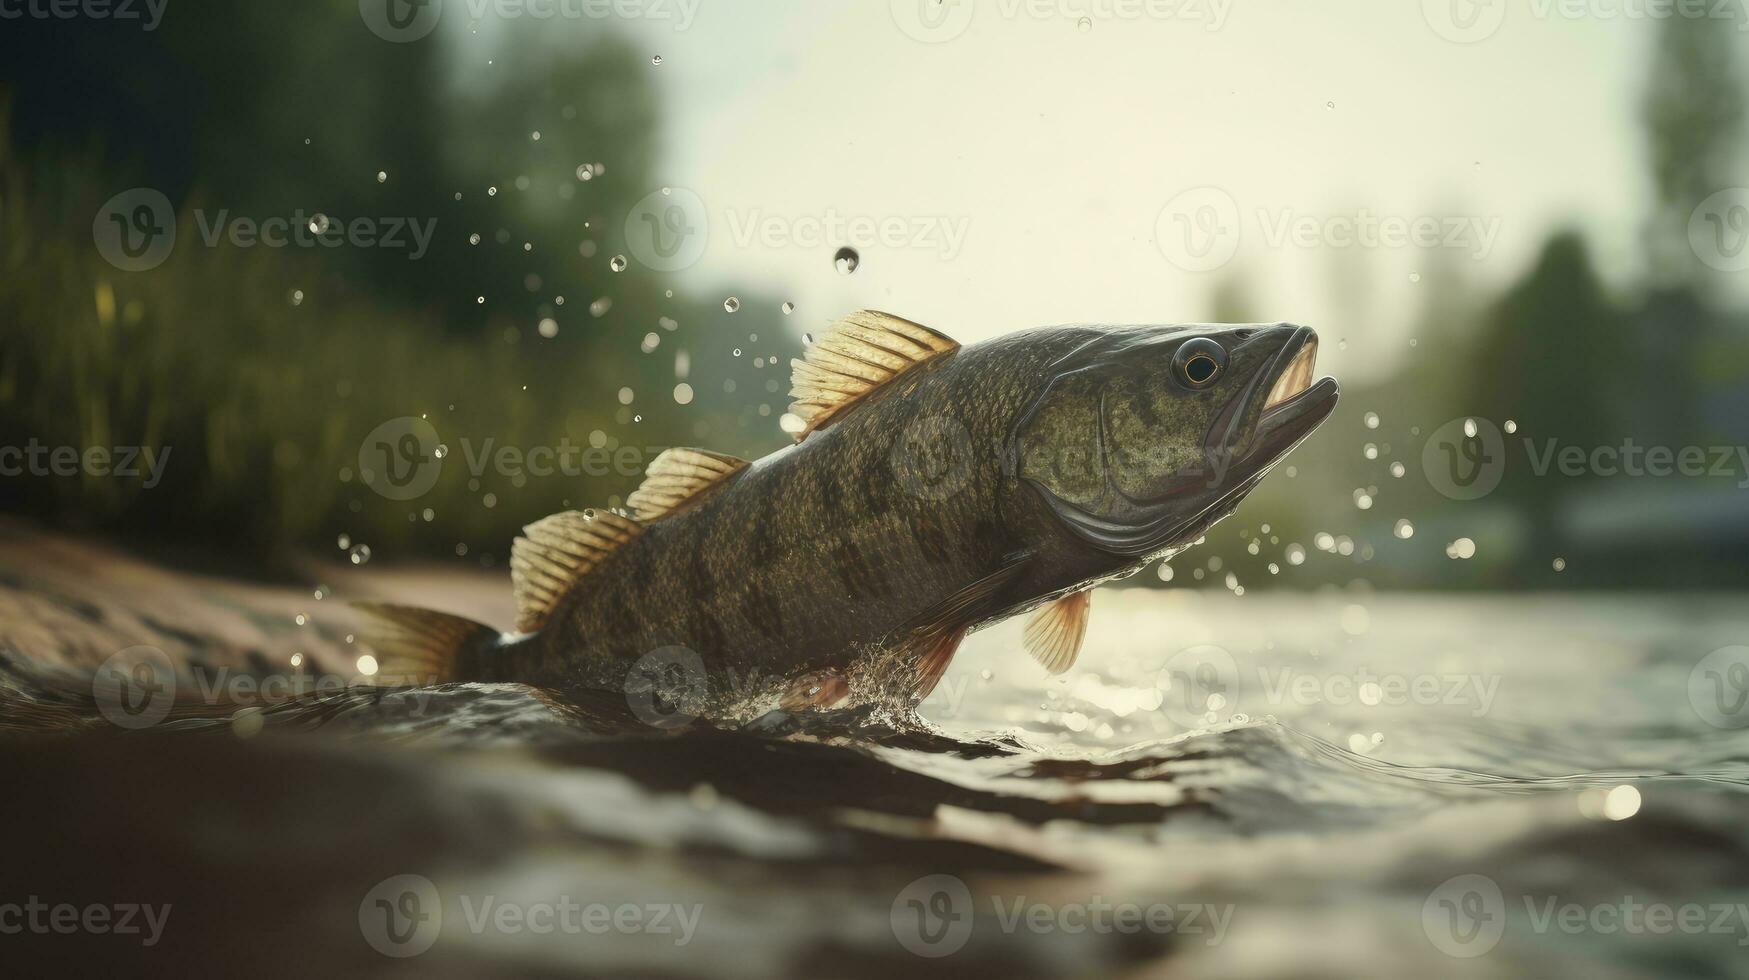 https://static.vecteezy.com/system/resources/previews/029/973/321/non_2x/jumping-bass-fish-in-realistic-cinematic-composition-photo.jpeg